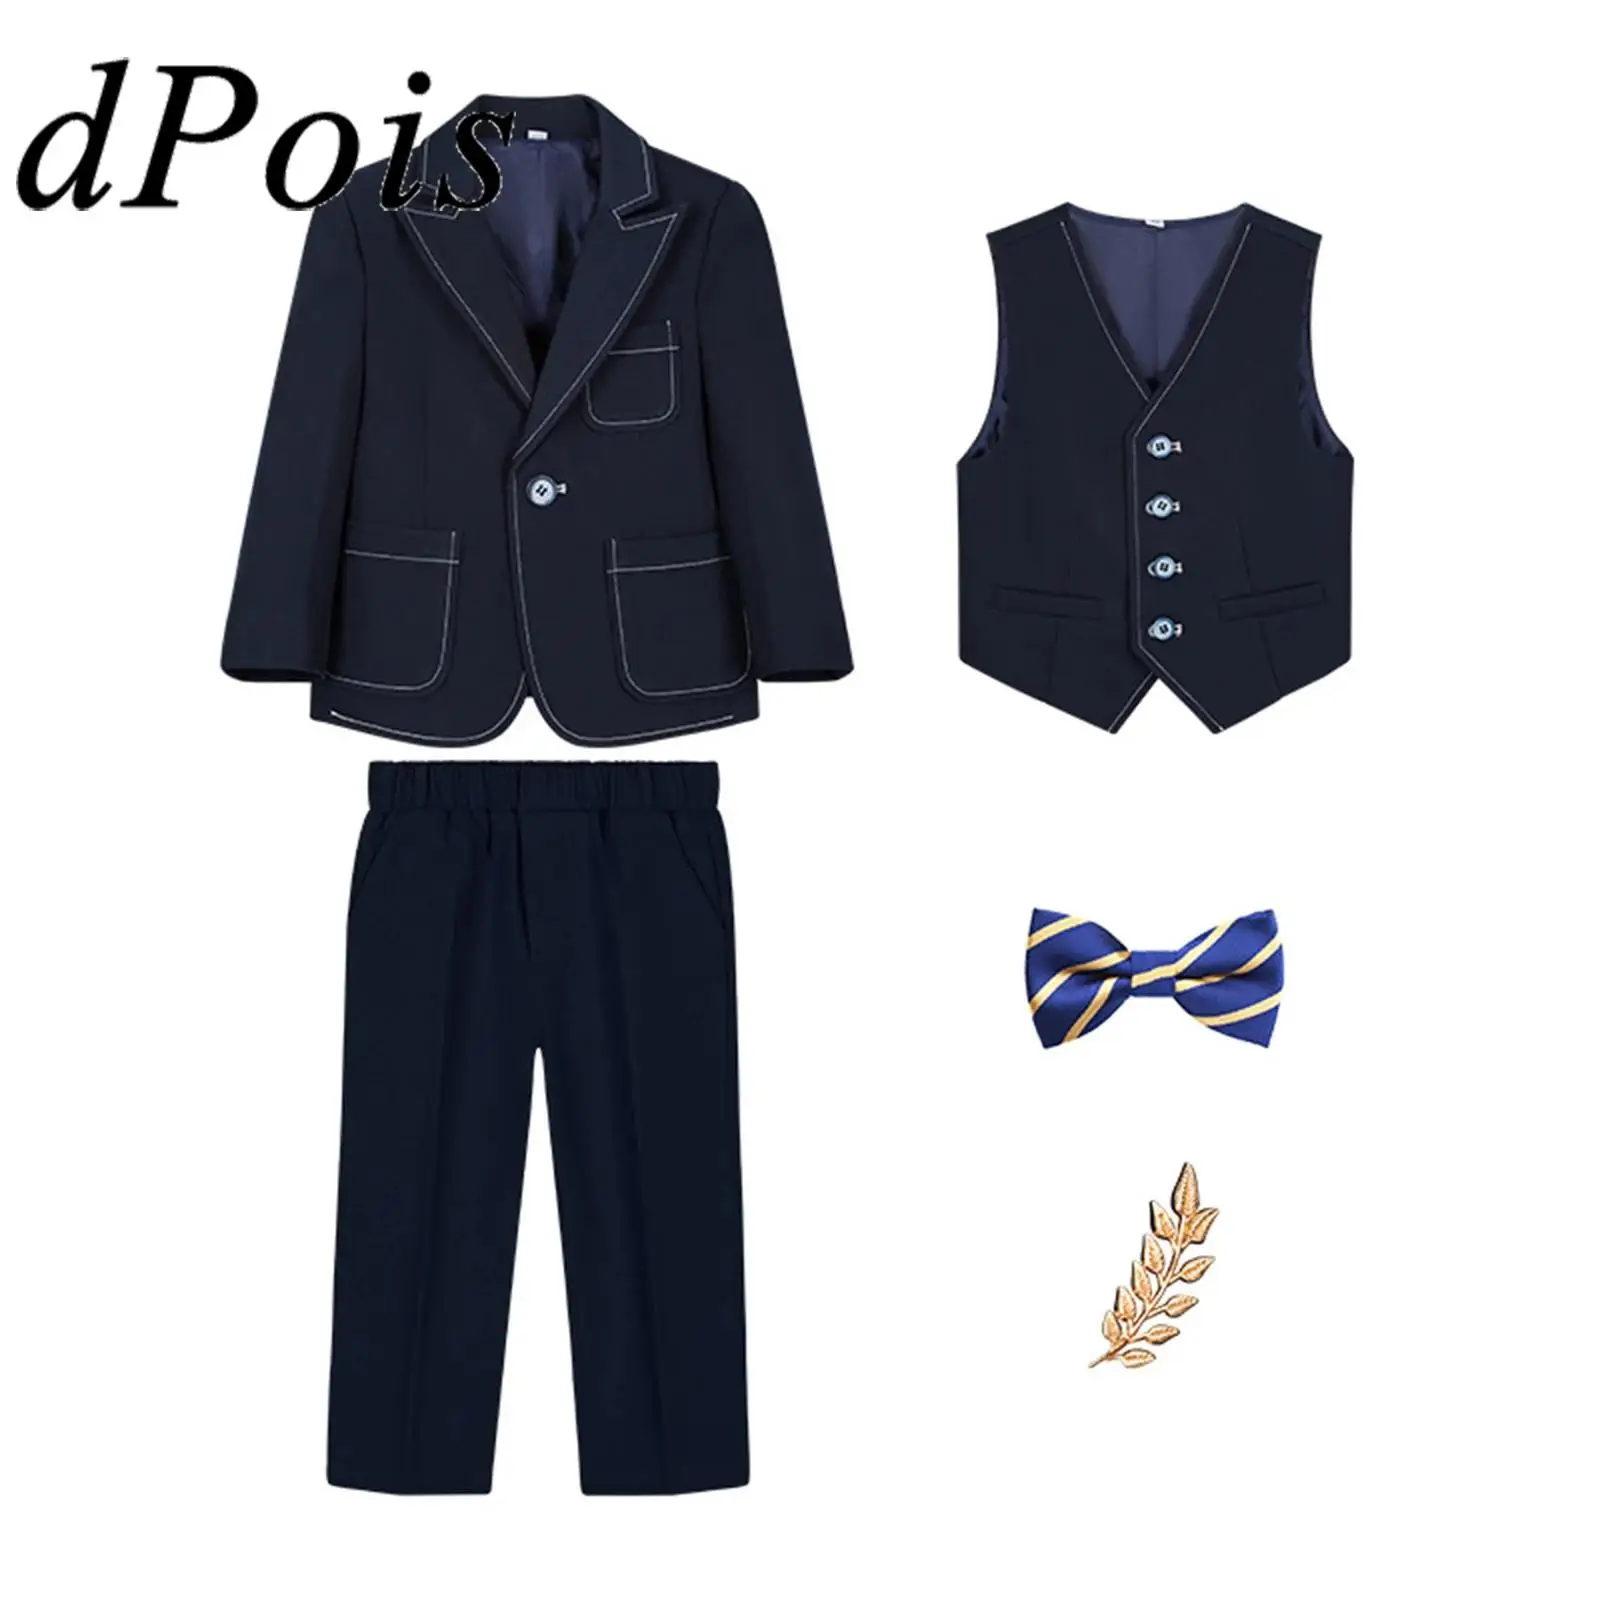 

Kids Boys Formal Suit Christening Gown School Uniforms Clothes Sets for Wedding Banquet Birthday Party 5pcs Gentleman Costumes